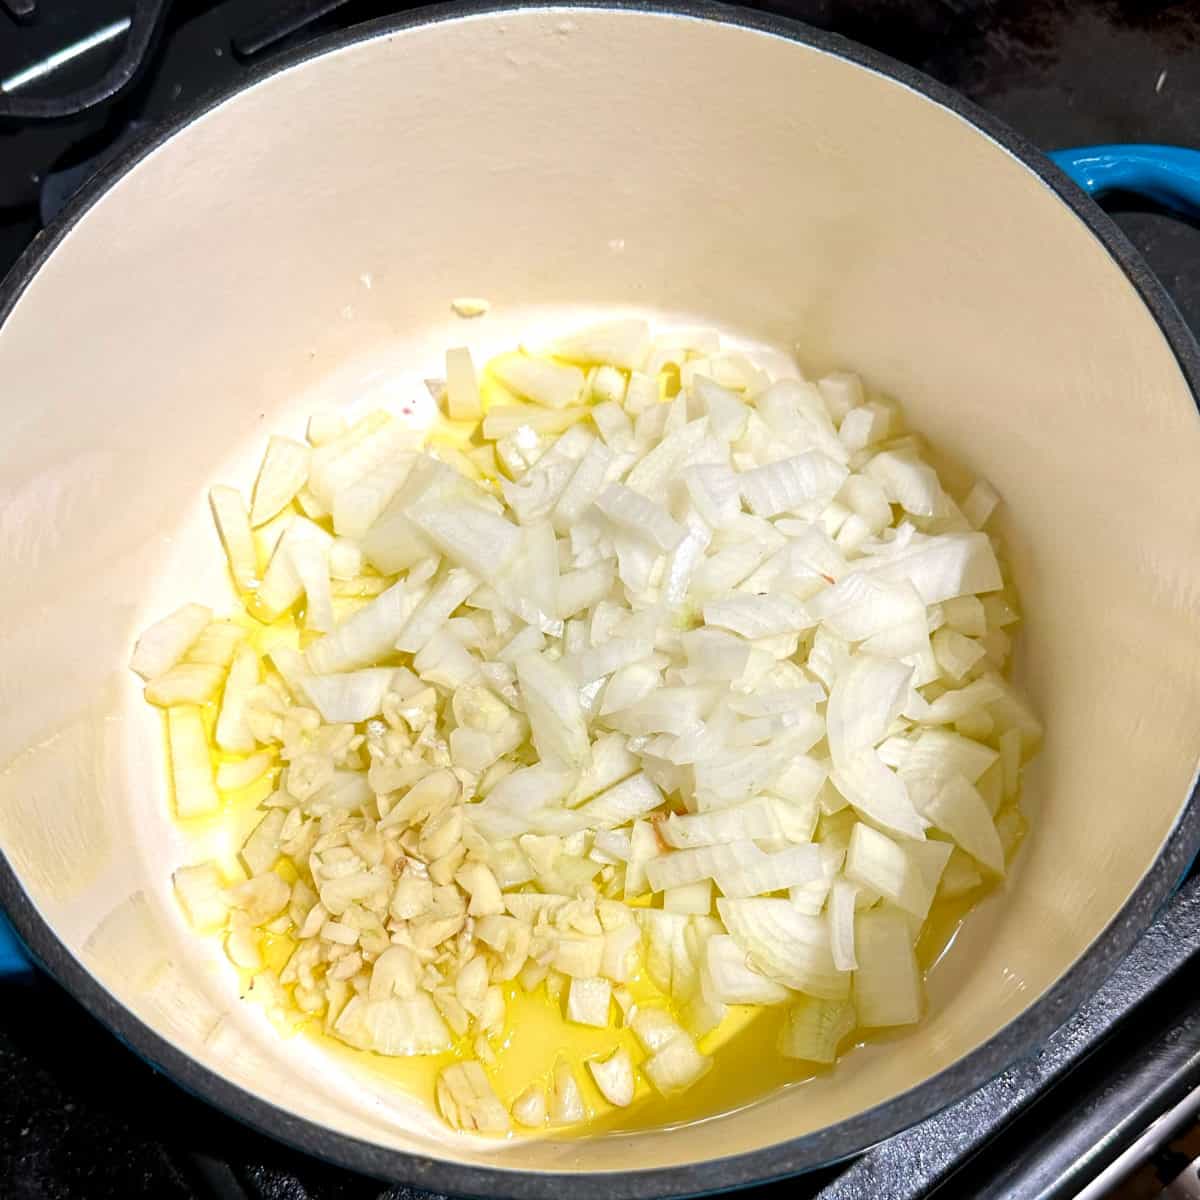 Onions and garlic sauteing in olive oil for vegan potato soup.